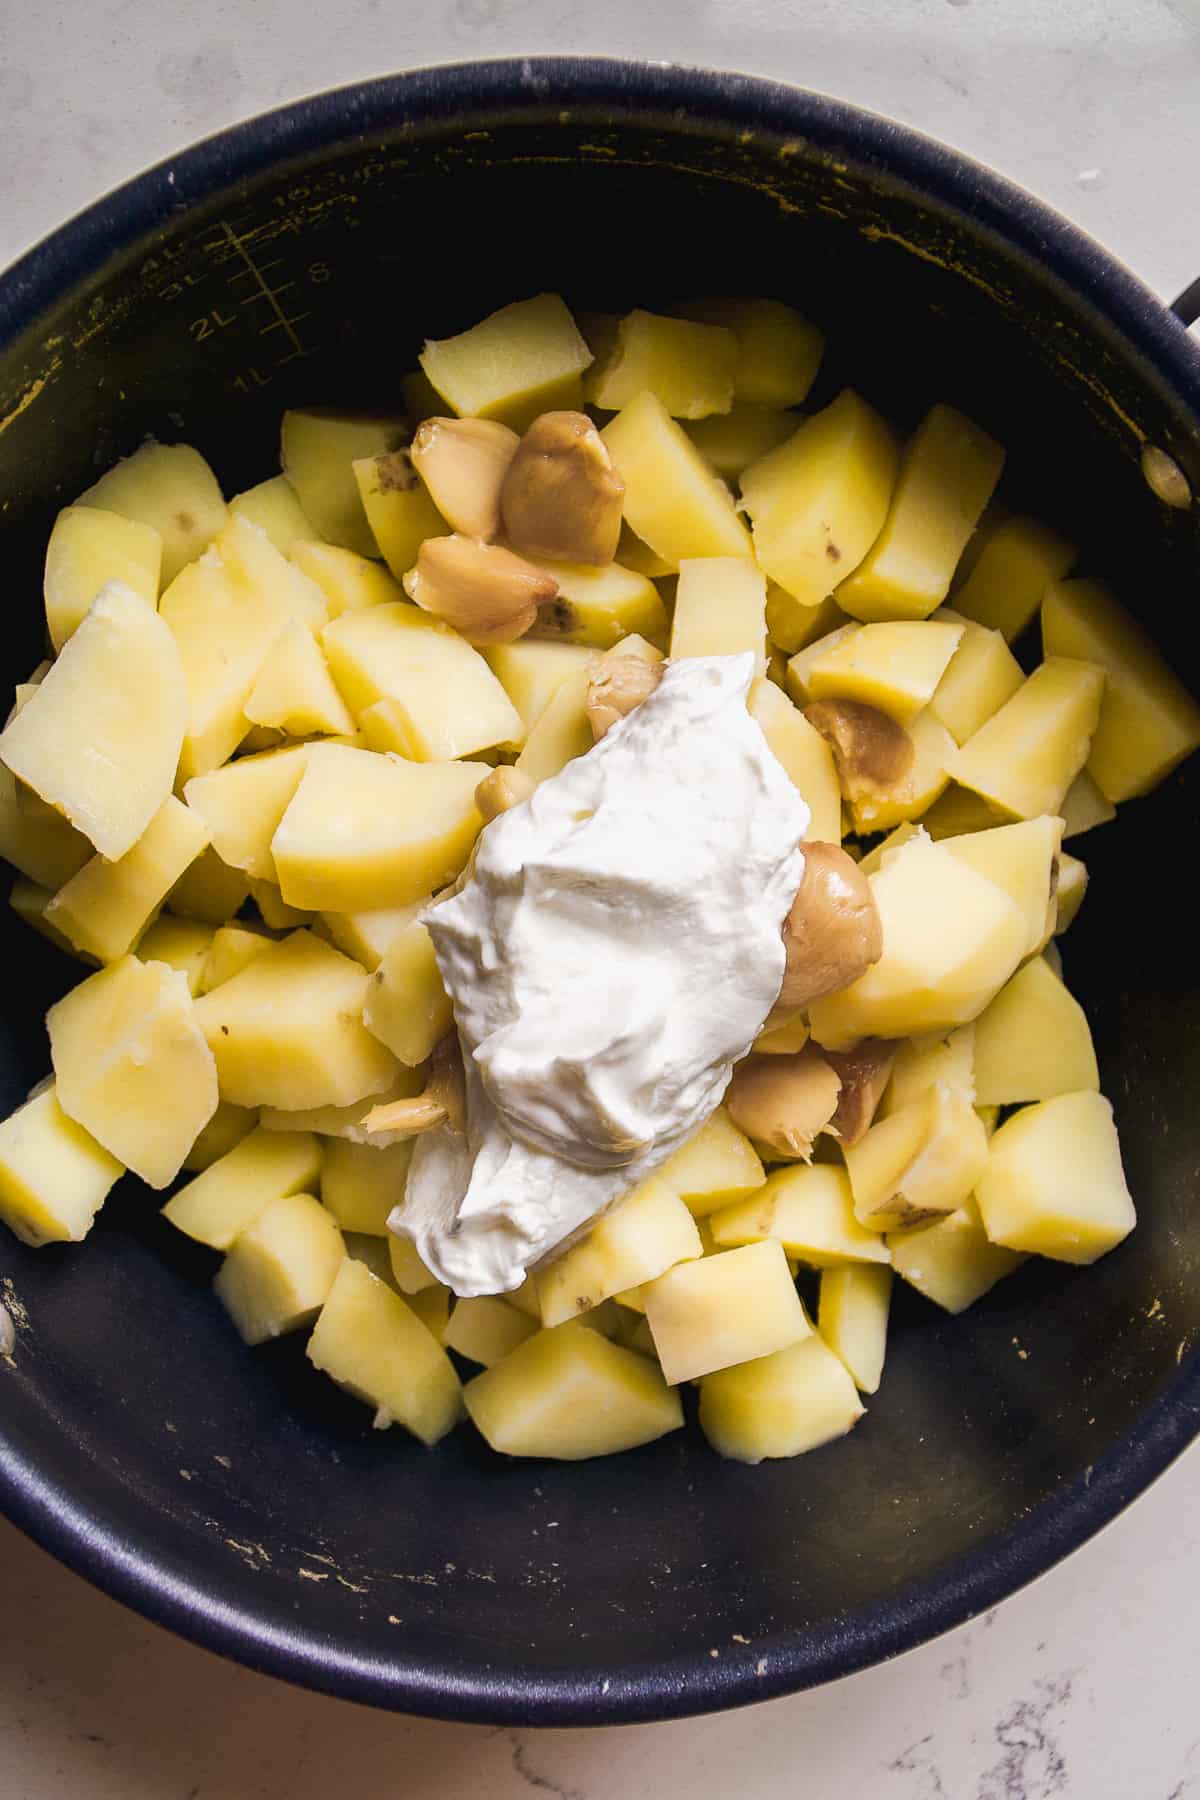 Potatoes cut into cubes in a pot with greek yogurt and roasted garlic.